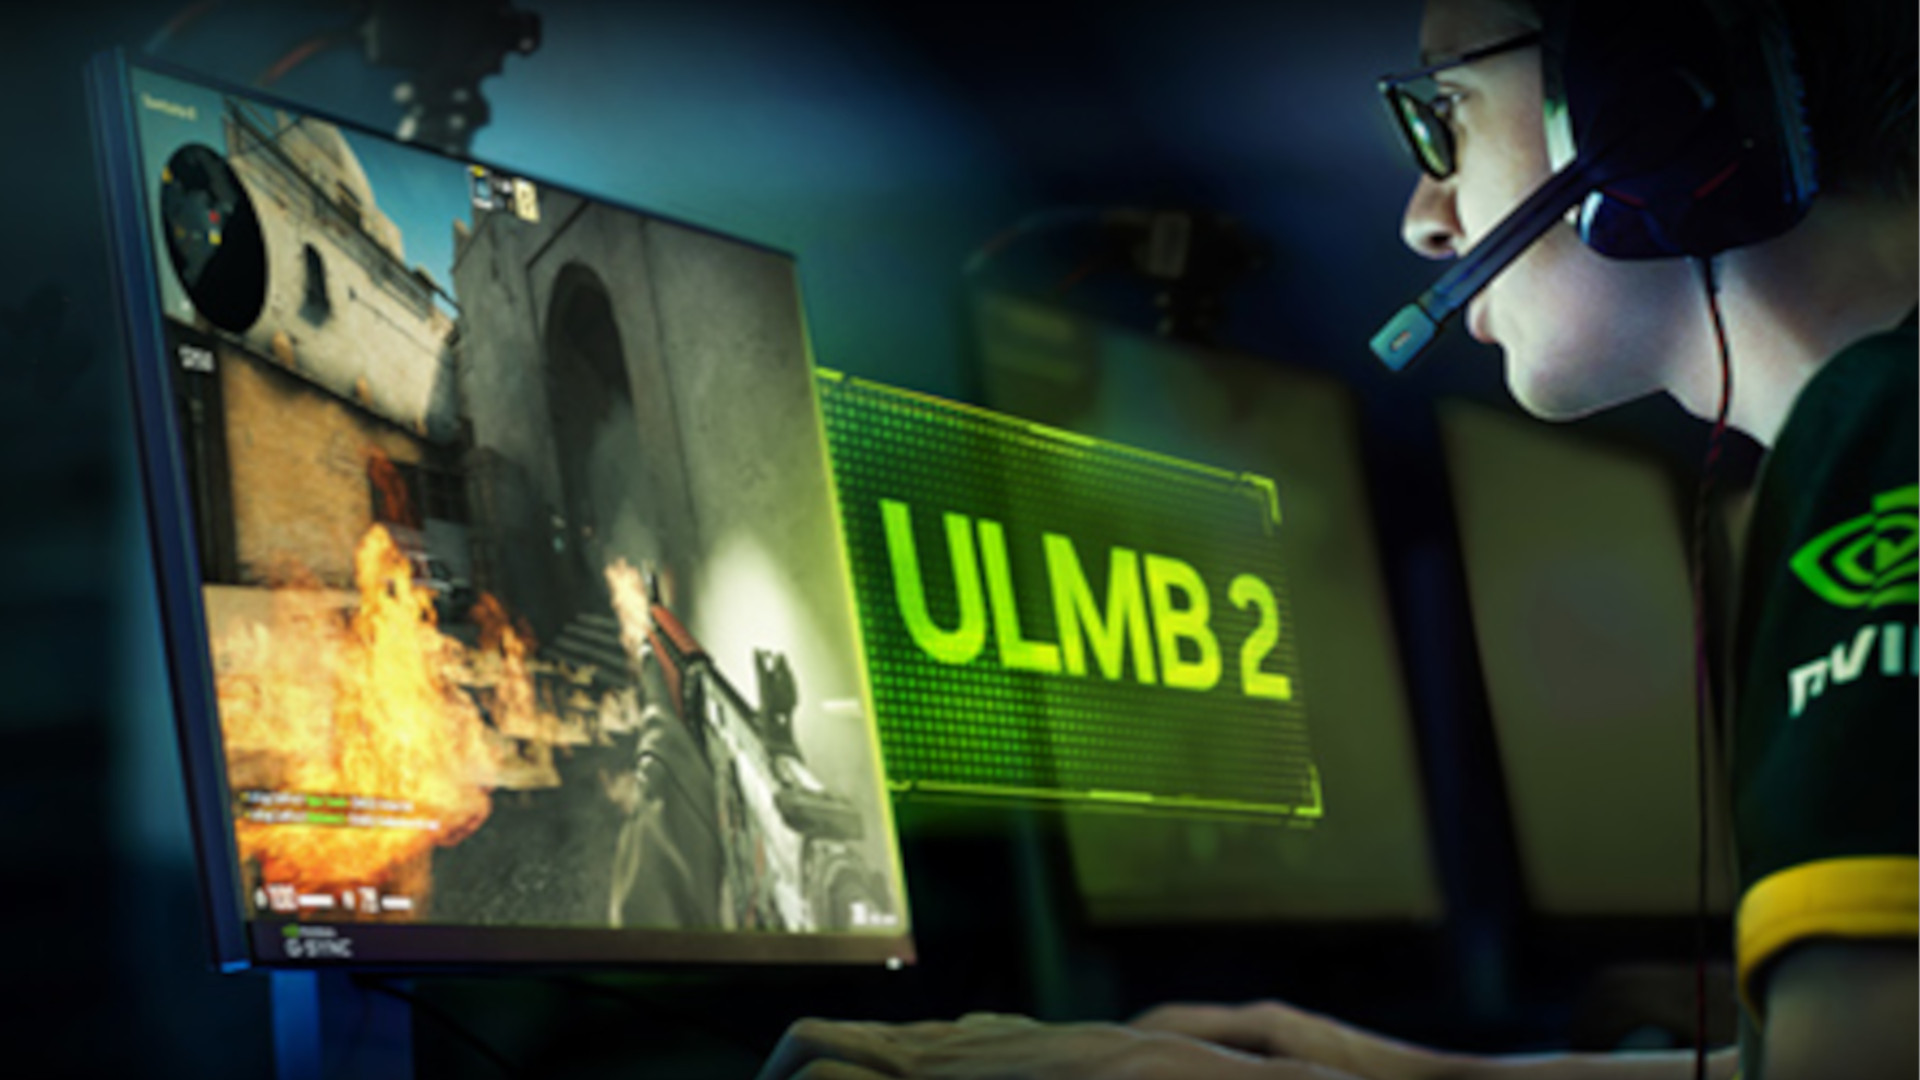 Nvidia G-Sync ULMB 2 reduces blur, but only on some monitors